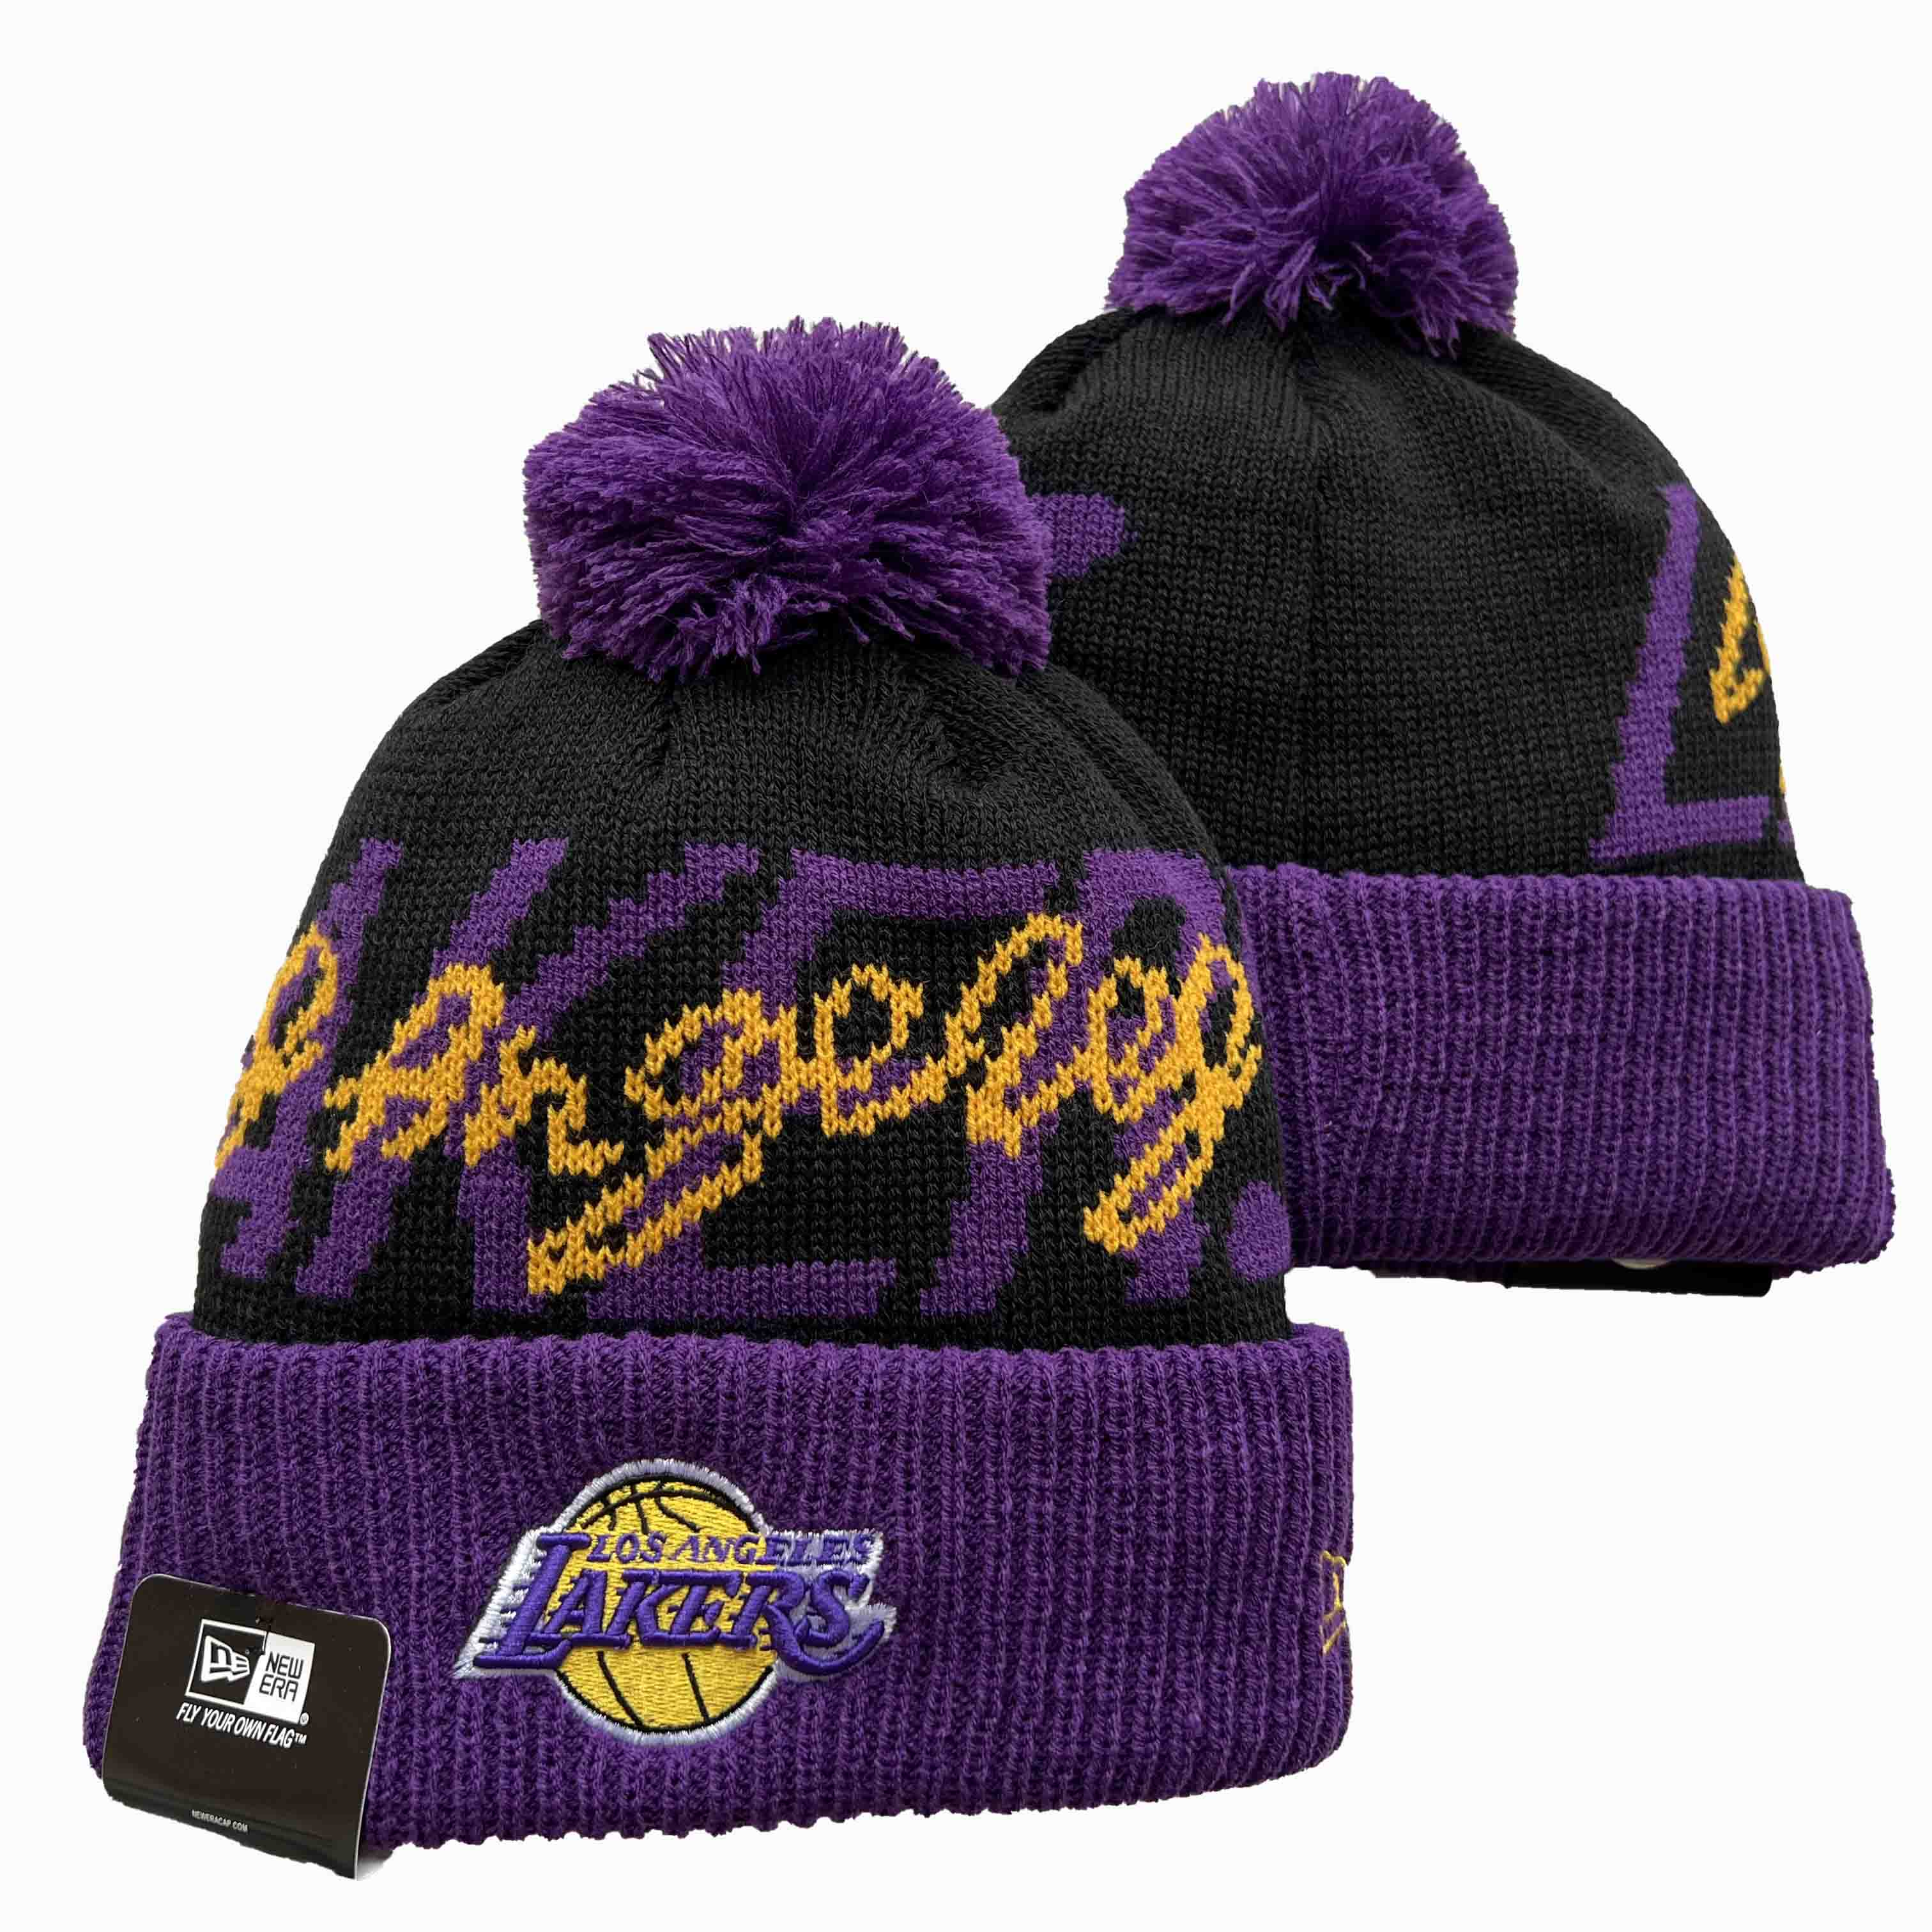 NBA Los Angeles Lakers Beanies Knit Hats-YD489